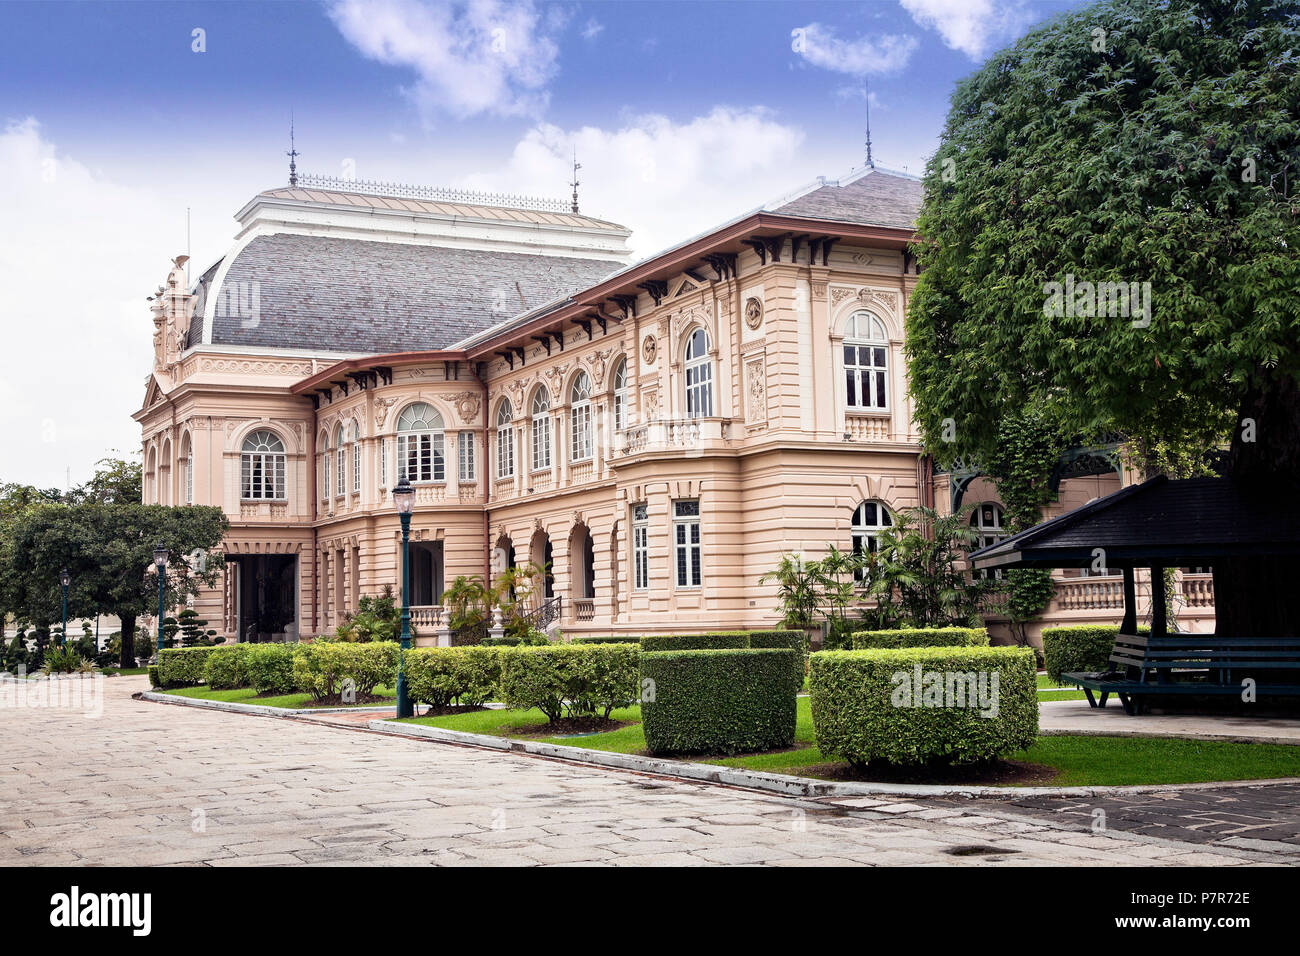 The Borom Phiiman Mansion now used as a guest house for visiting heads of state on the grounds of the Grand Palace, Bangkok, Thailand. Stock Photo